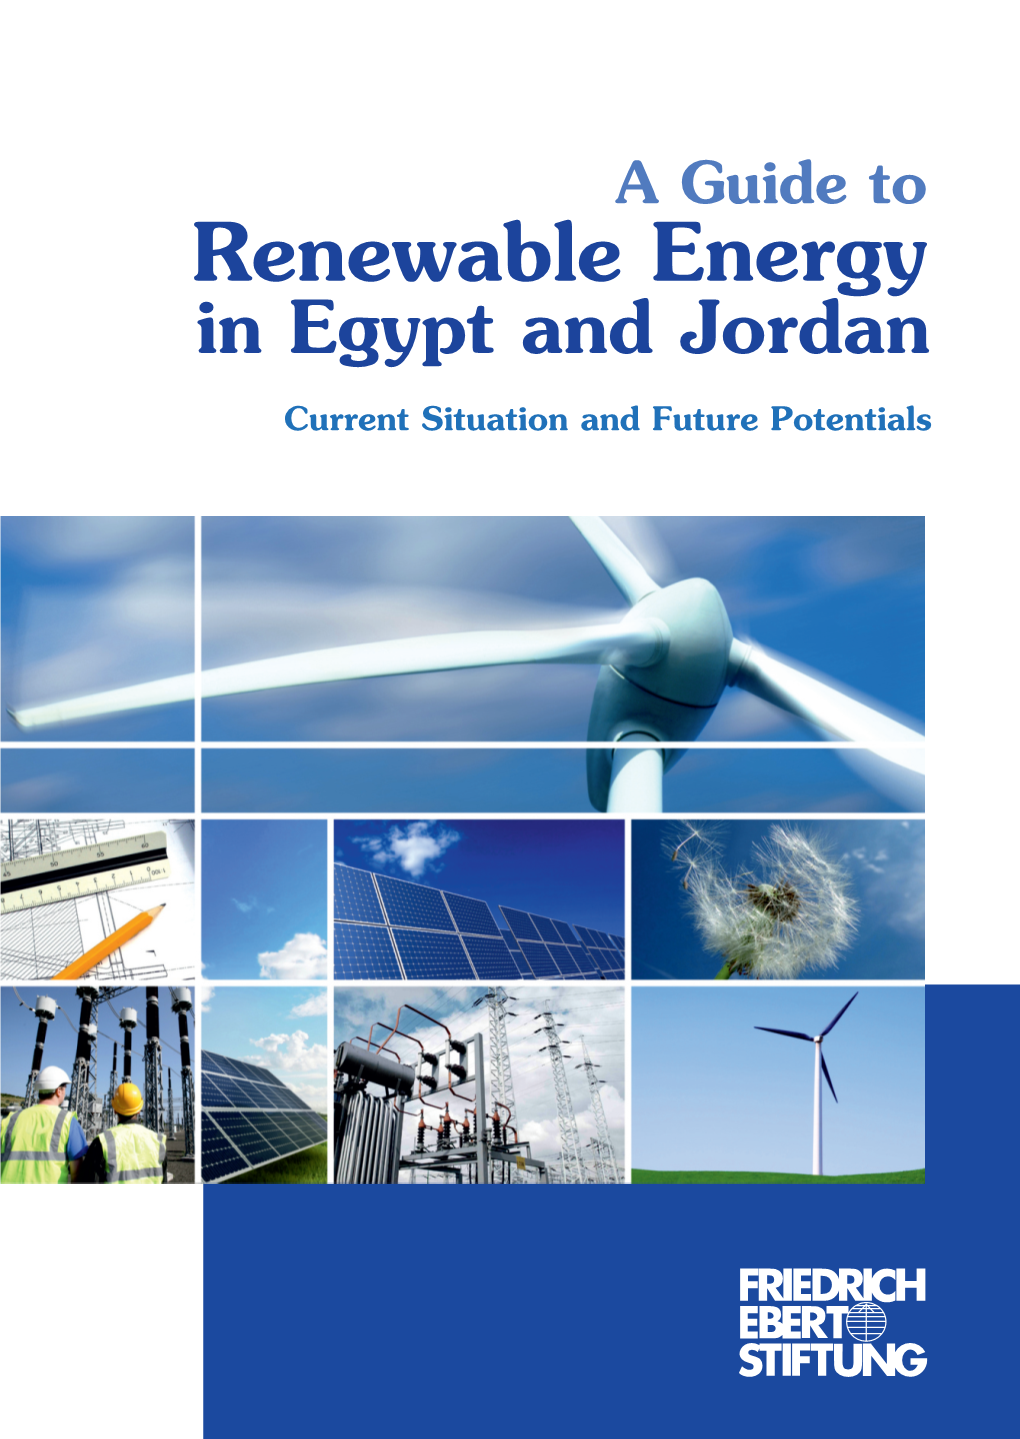 A Guide to Renewable Energy in Egypt and Jordan: Current Situation and Future Potentials